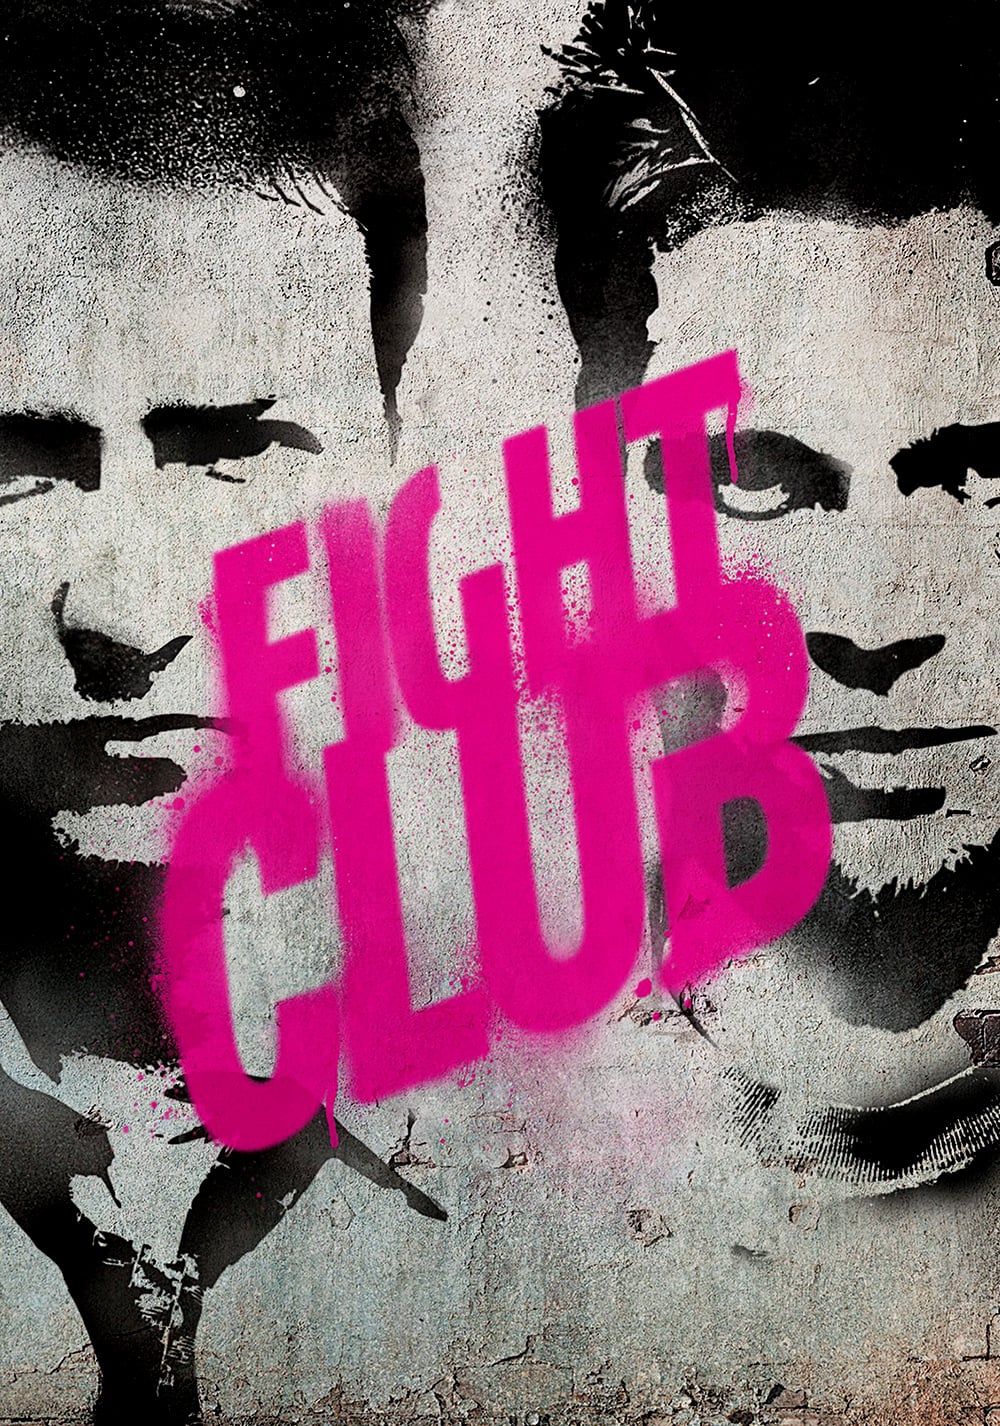 Poster for the movie "Fight Club"